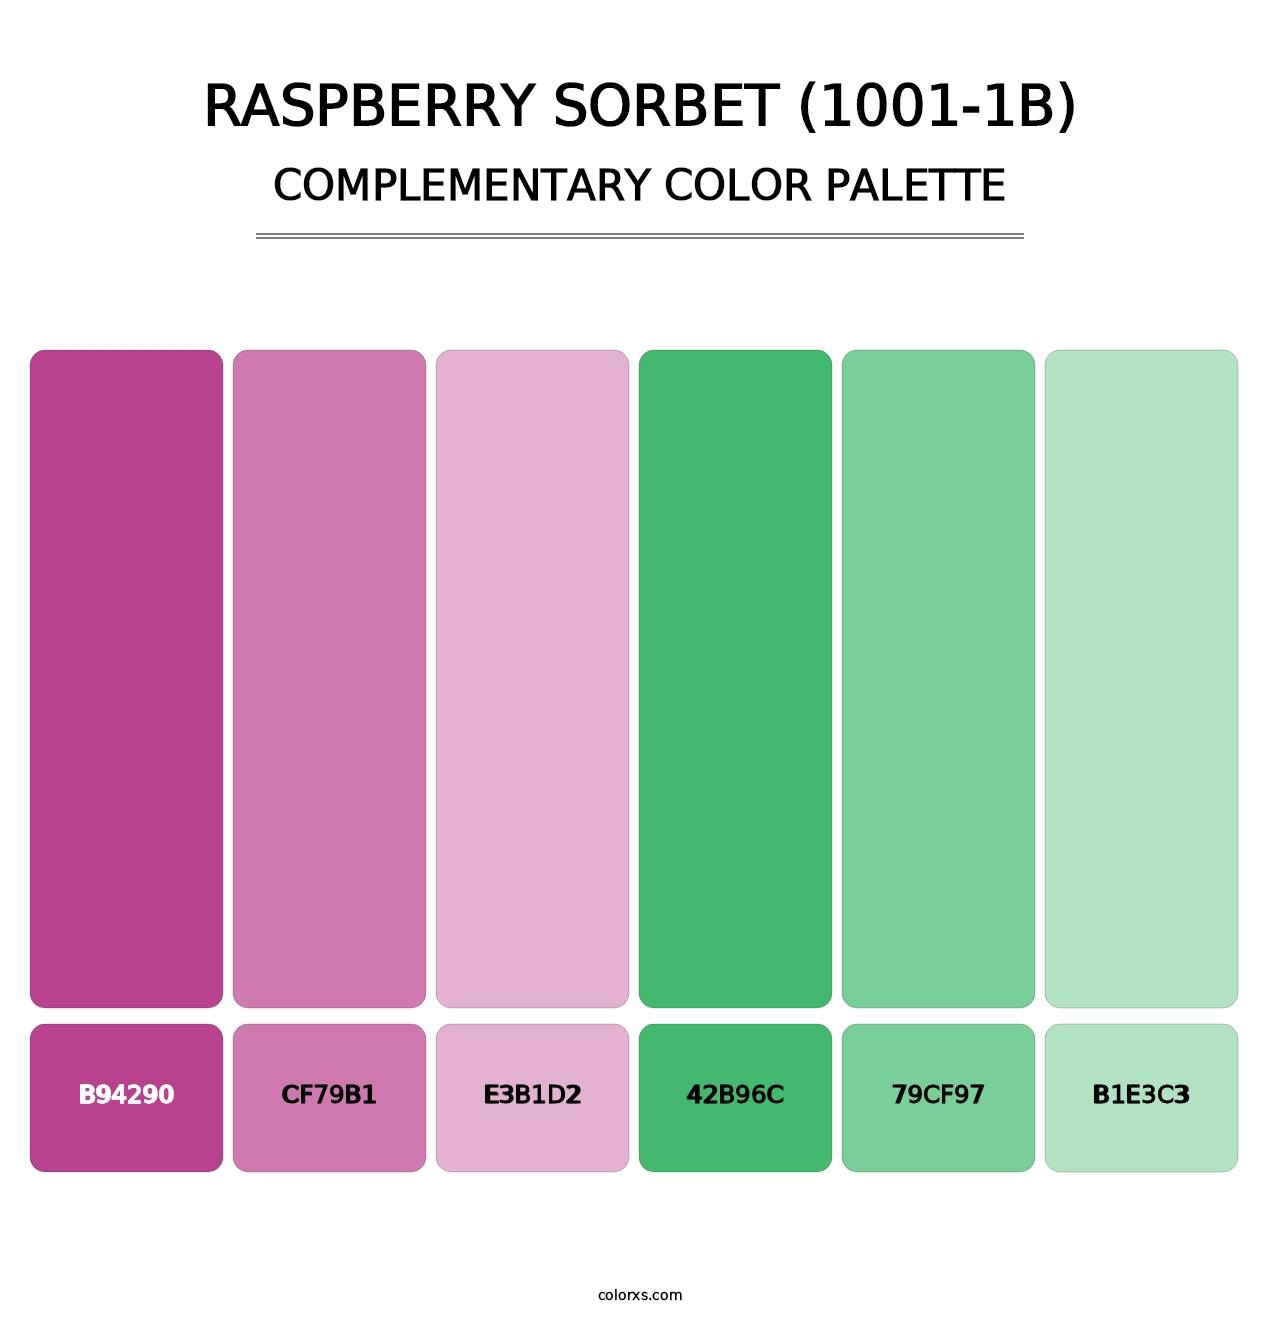 Raspberry Sorbet (1001-1B) - Complementary Color Palette